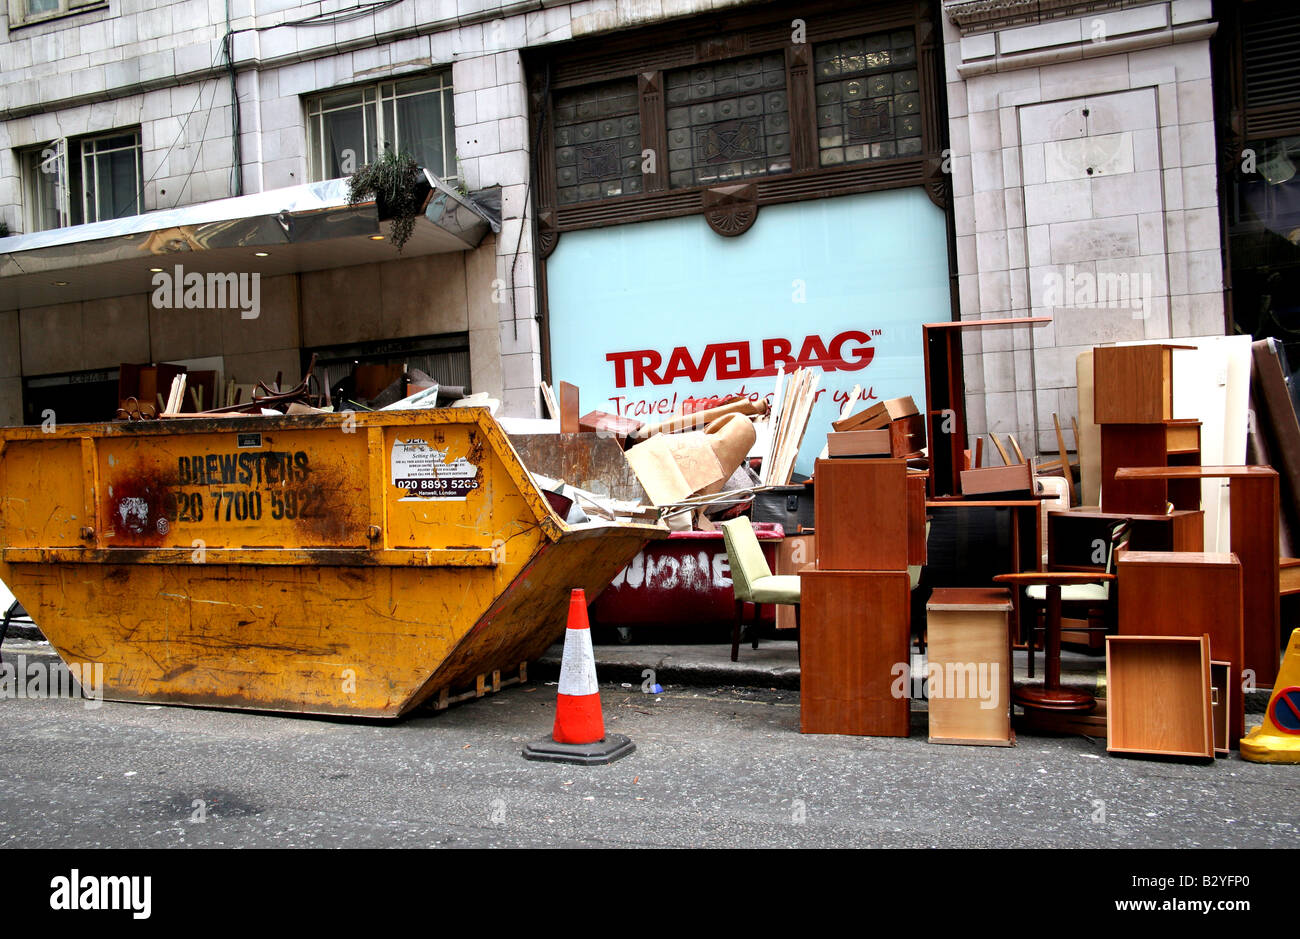 Old Furniture Piled Up In Street Outside Hotel Being Refurbished